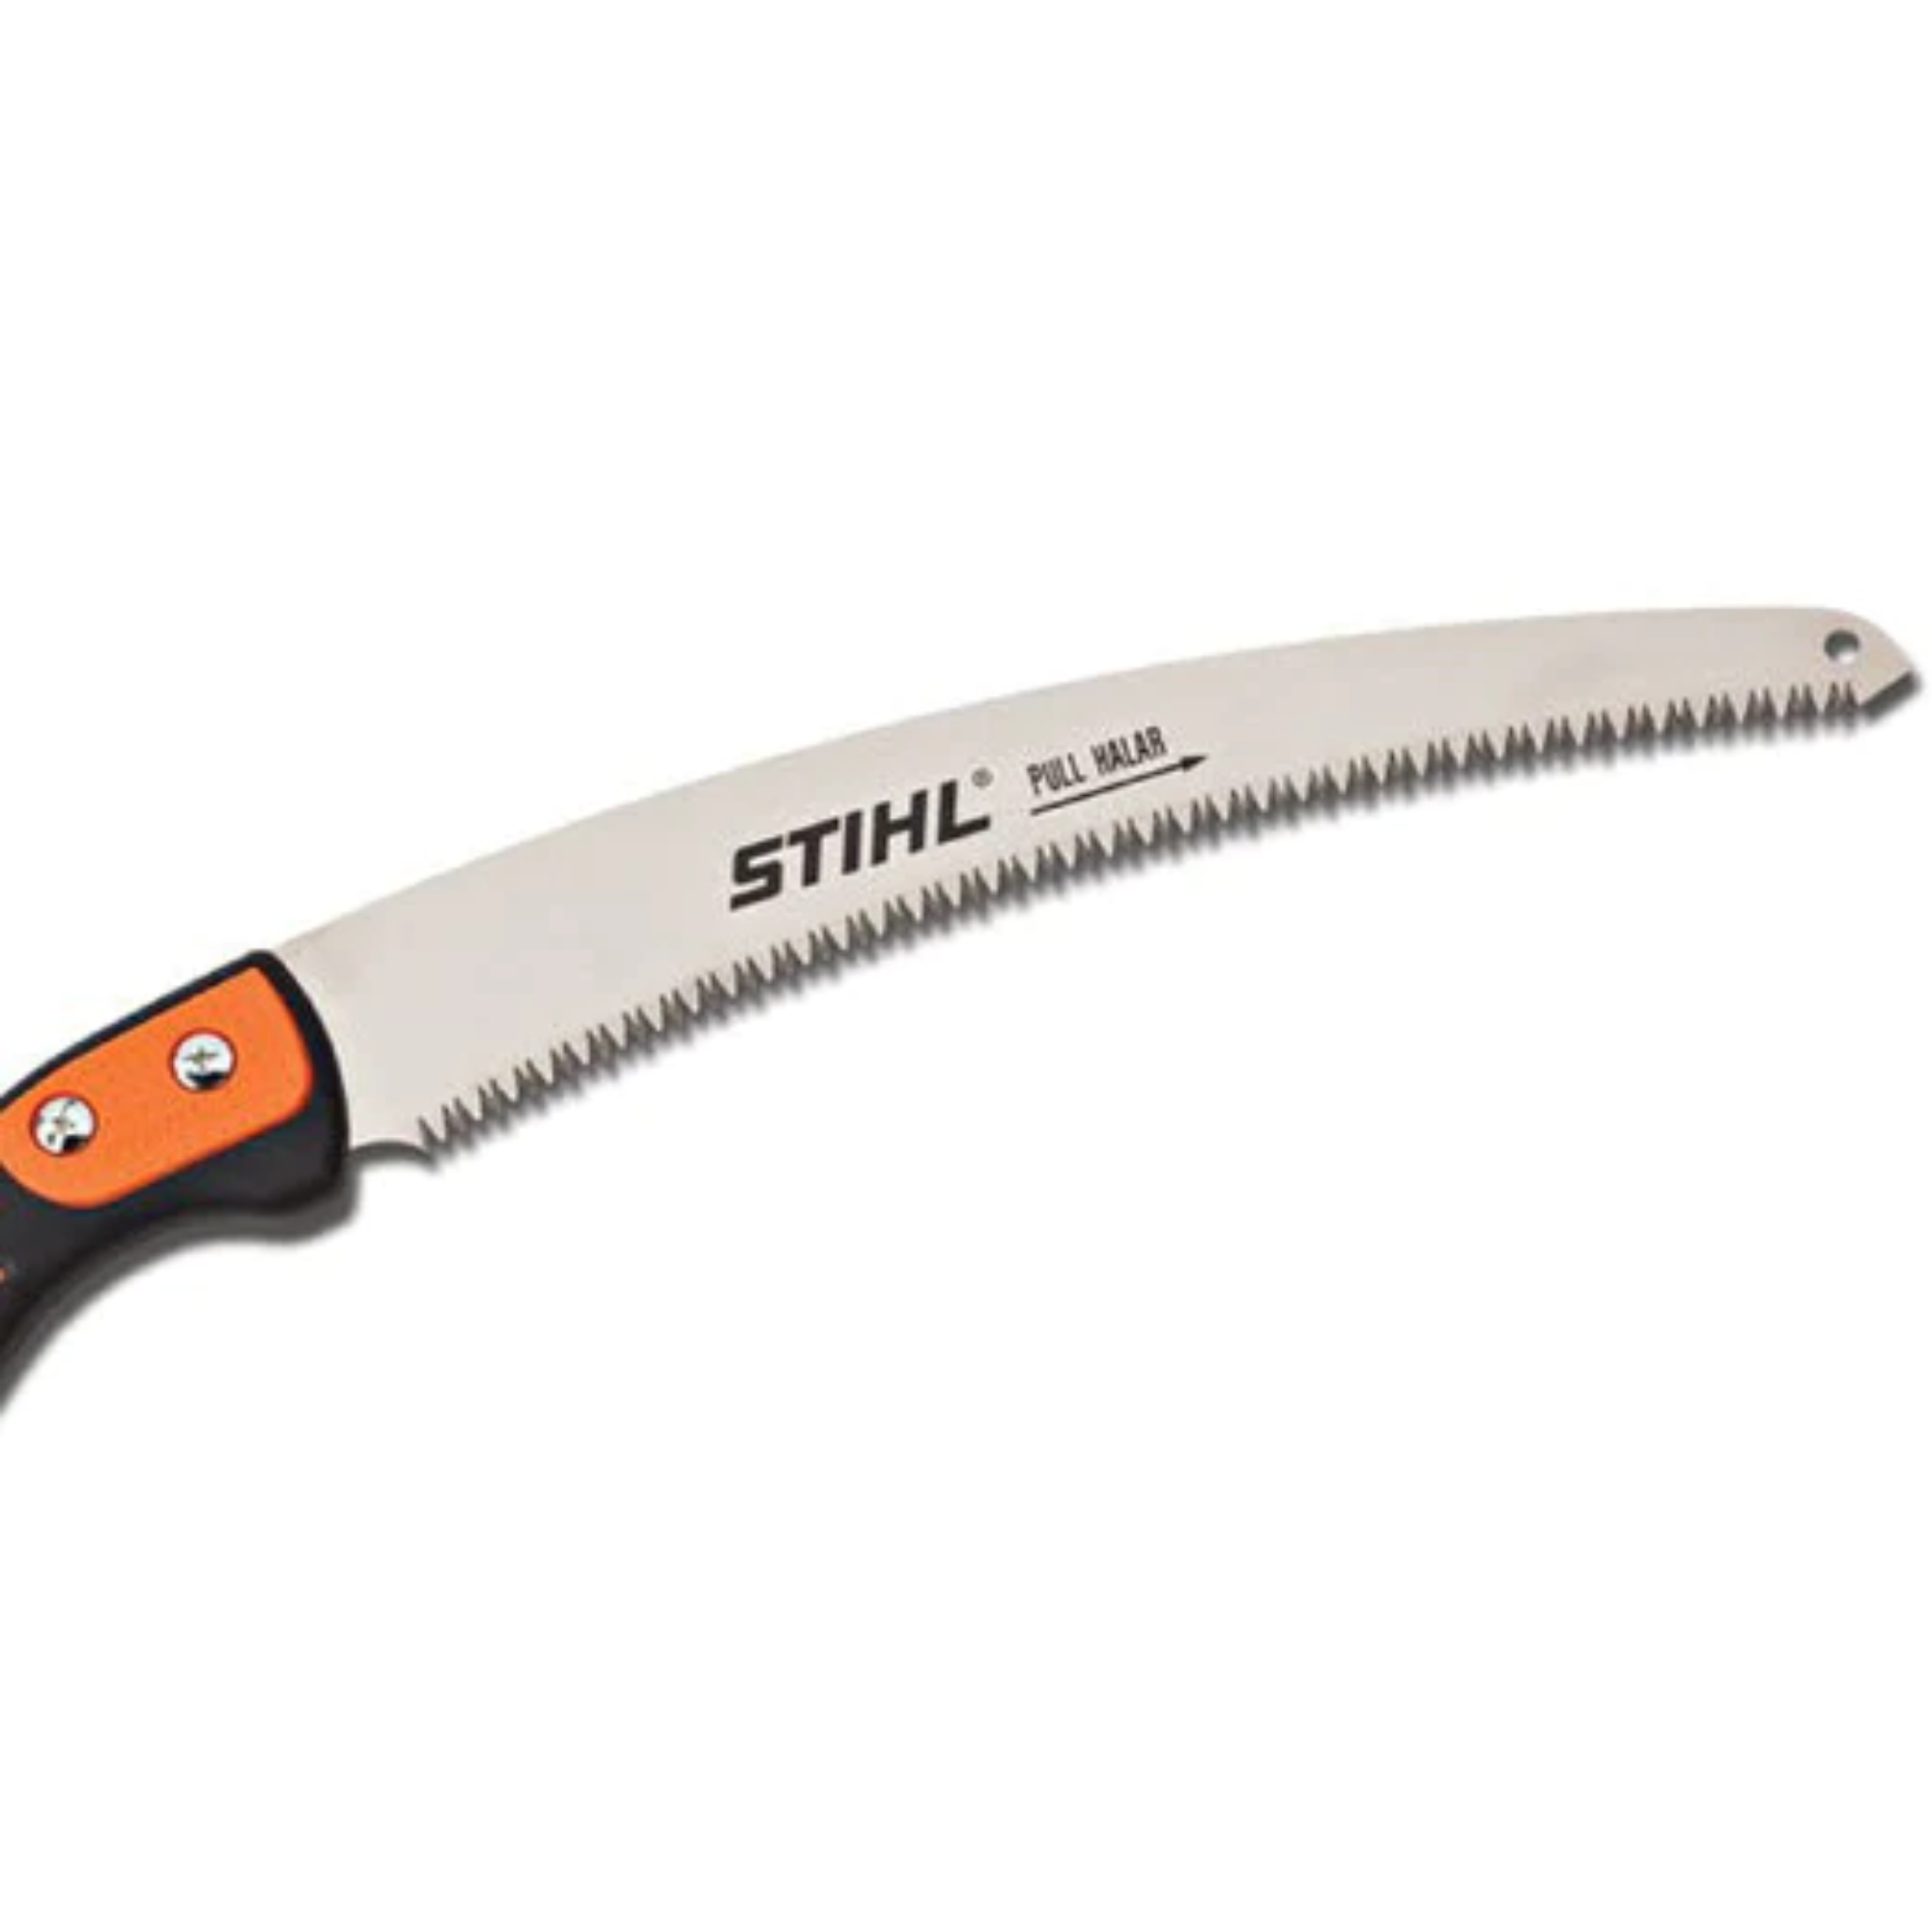 STIHL Replacement Blade for PS70 & PP900 | 0000 882 0913